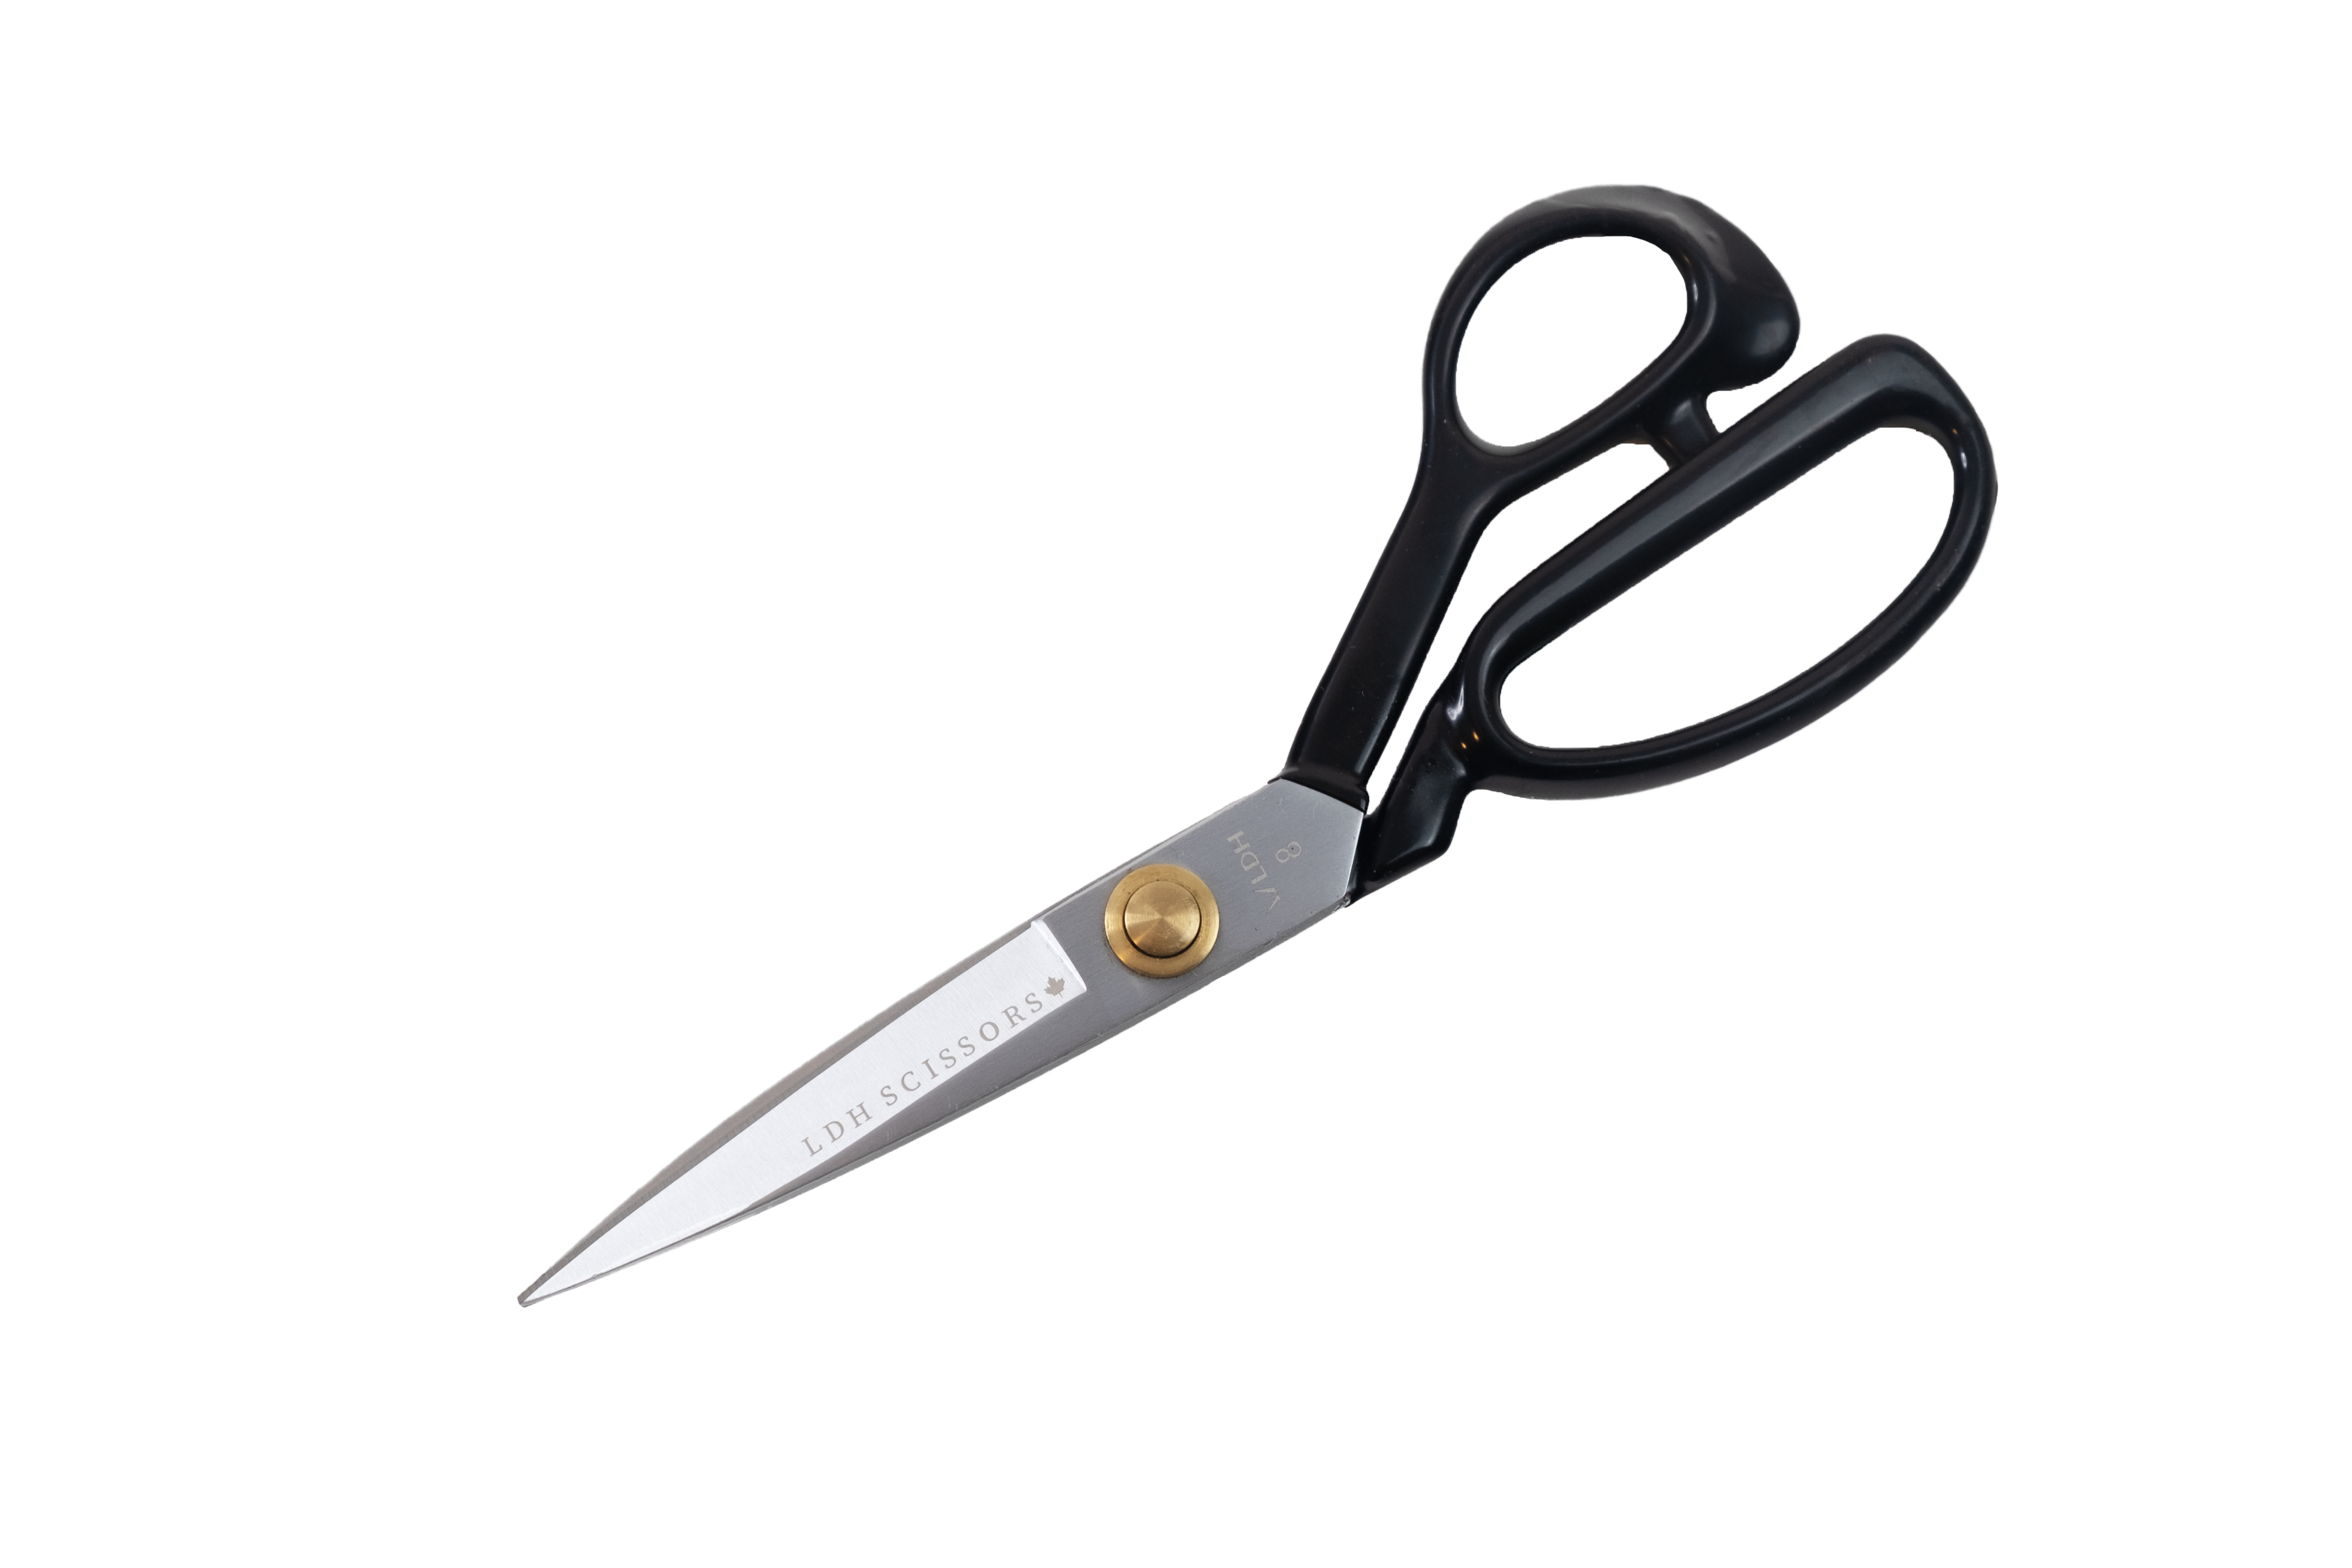 Midnight Edition Fabric Shears from LDH Scissors - Ritual Dyes